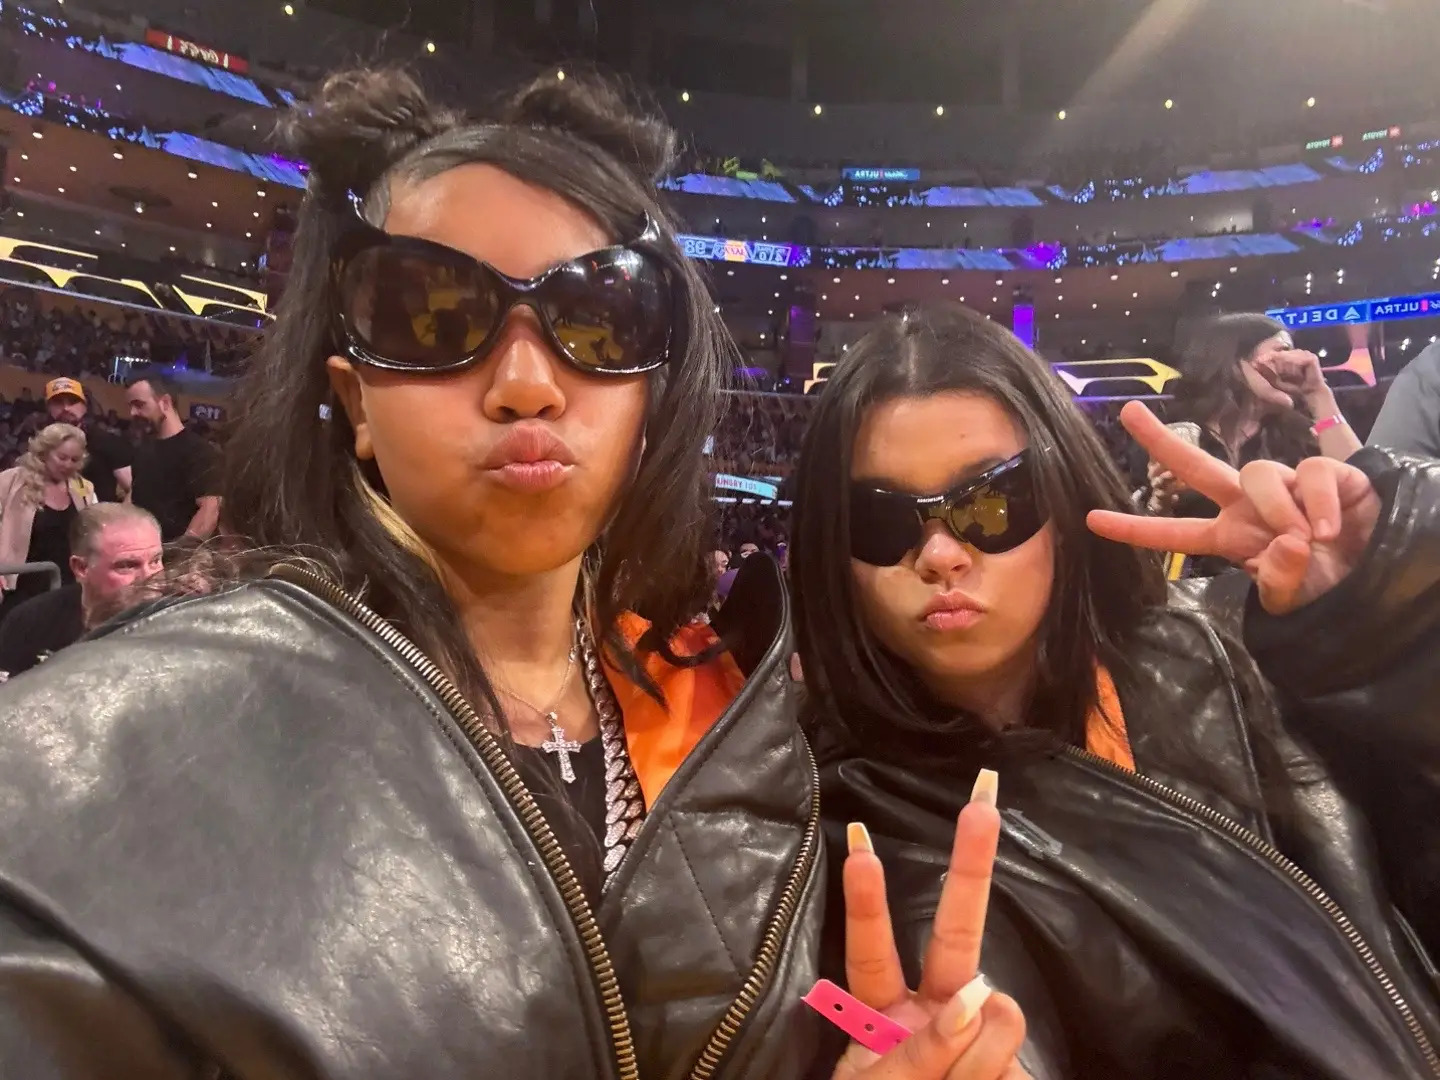 North included several selfies of her and her friend sitting courtside